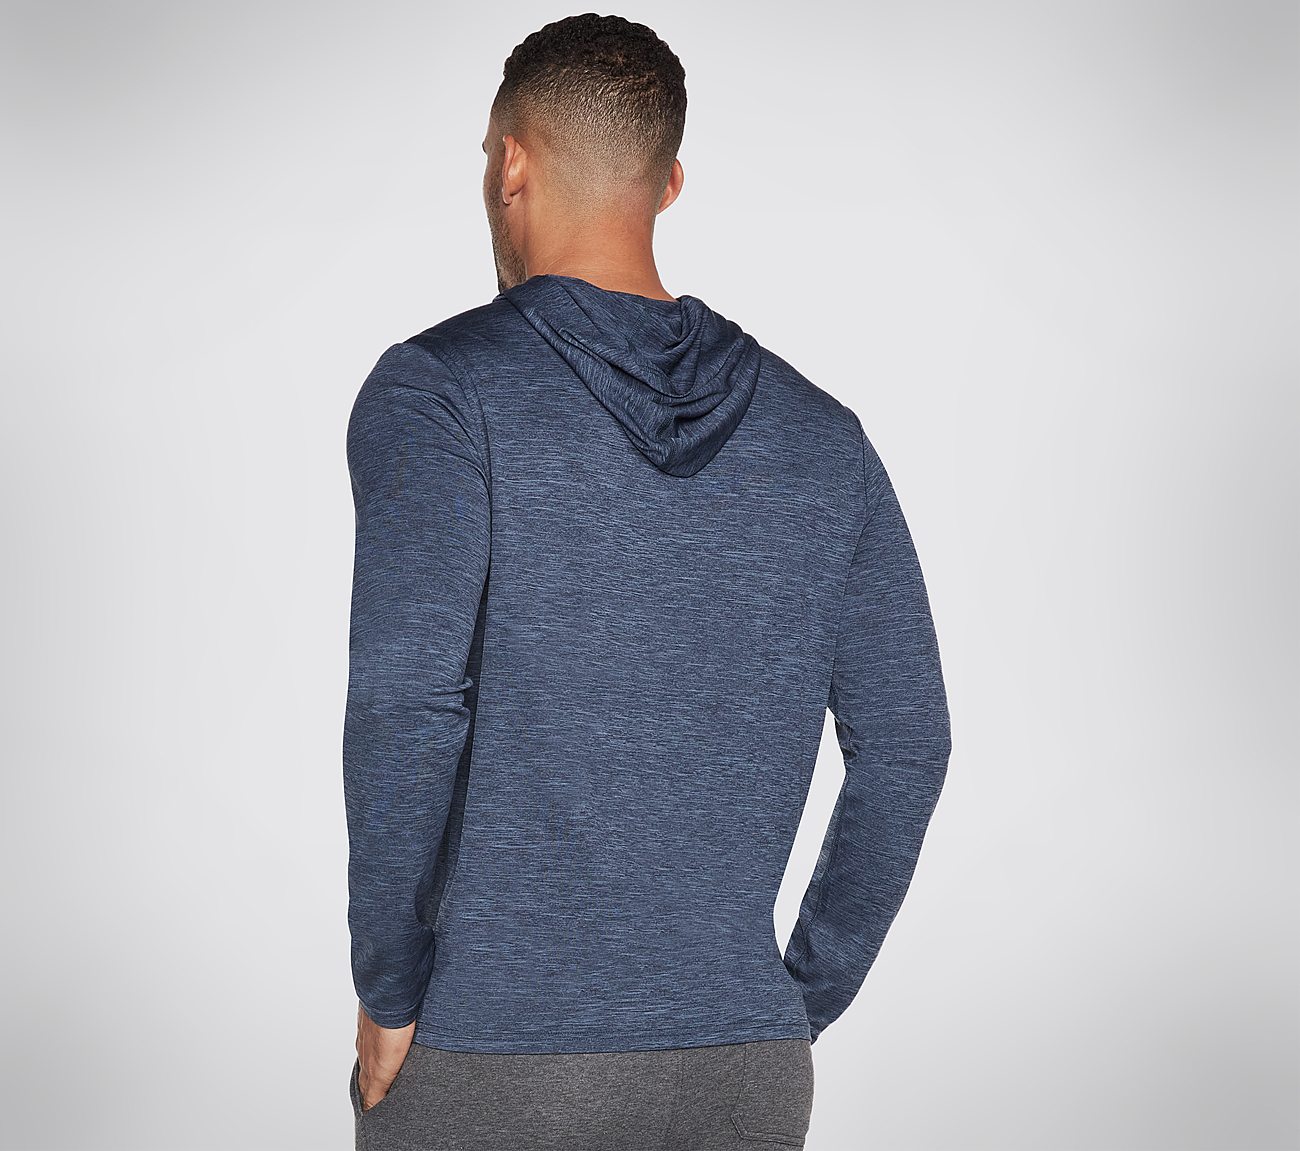 ON THE ROAD HOODED LS, BLUE/GREY Apparel Top View